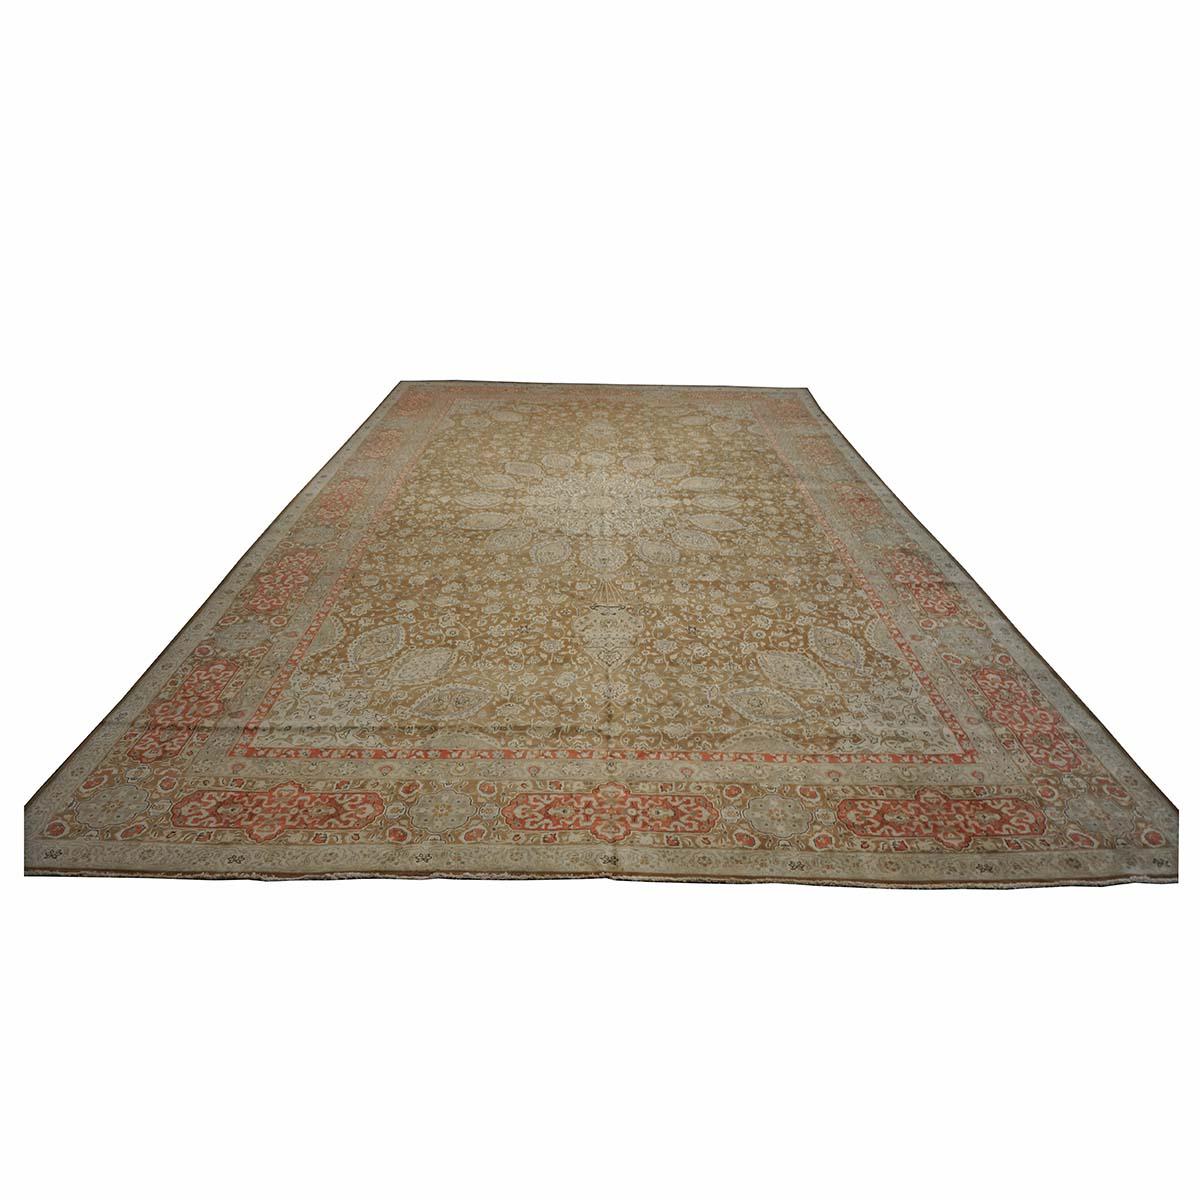 Mid-20th Century Antique 1930s Persian Tabriz 13x20 Brown & Salmon Oversized Handmade Area Rug For Sale